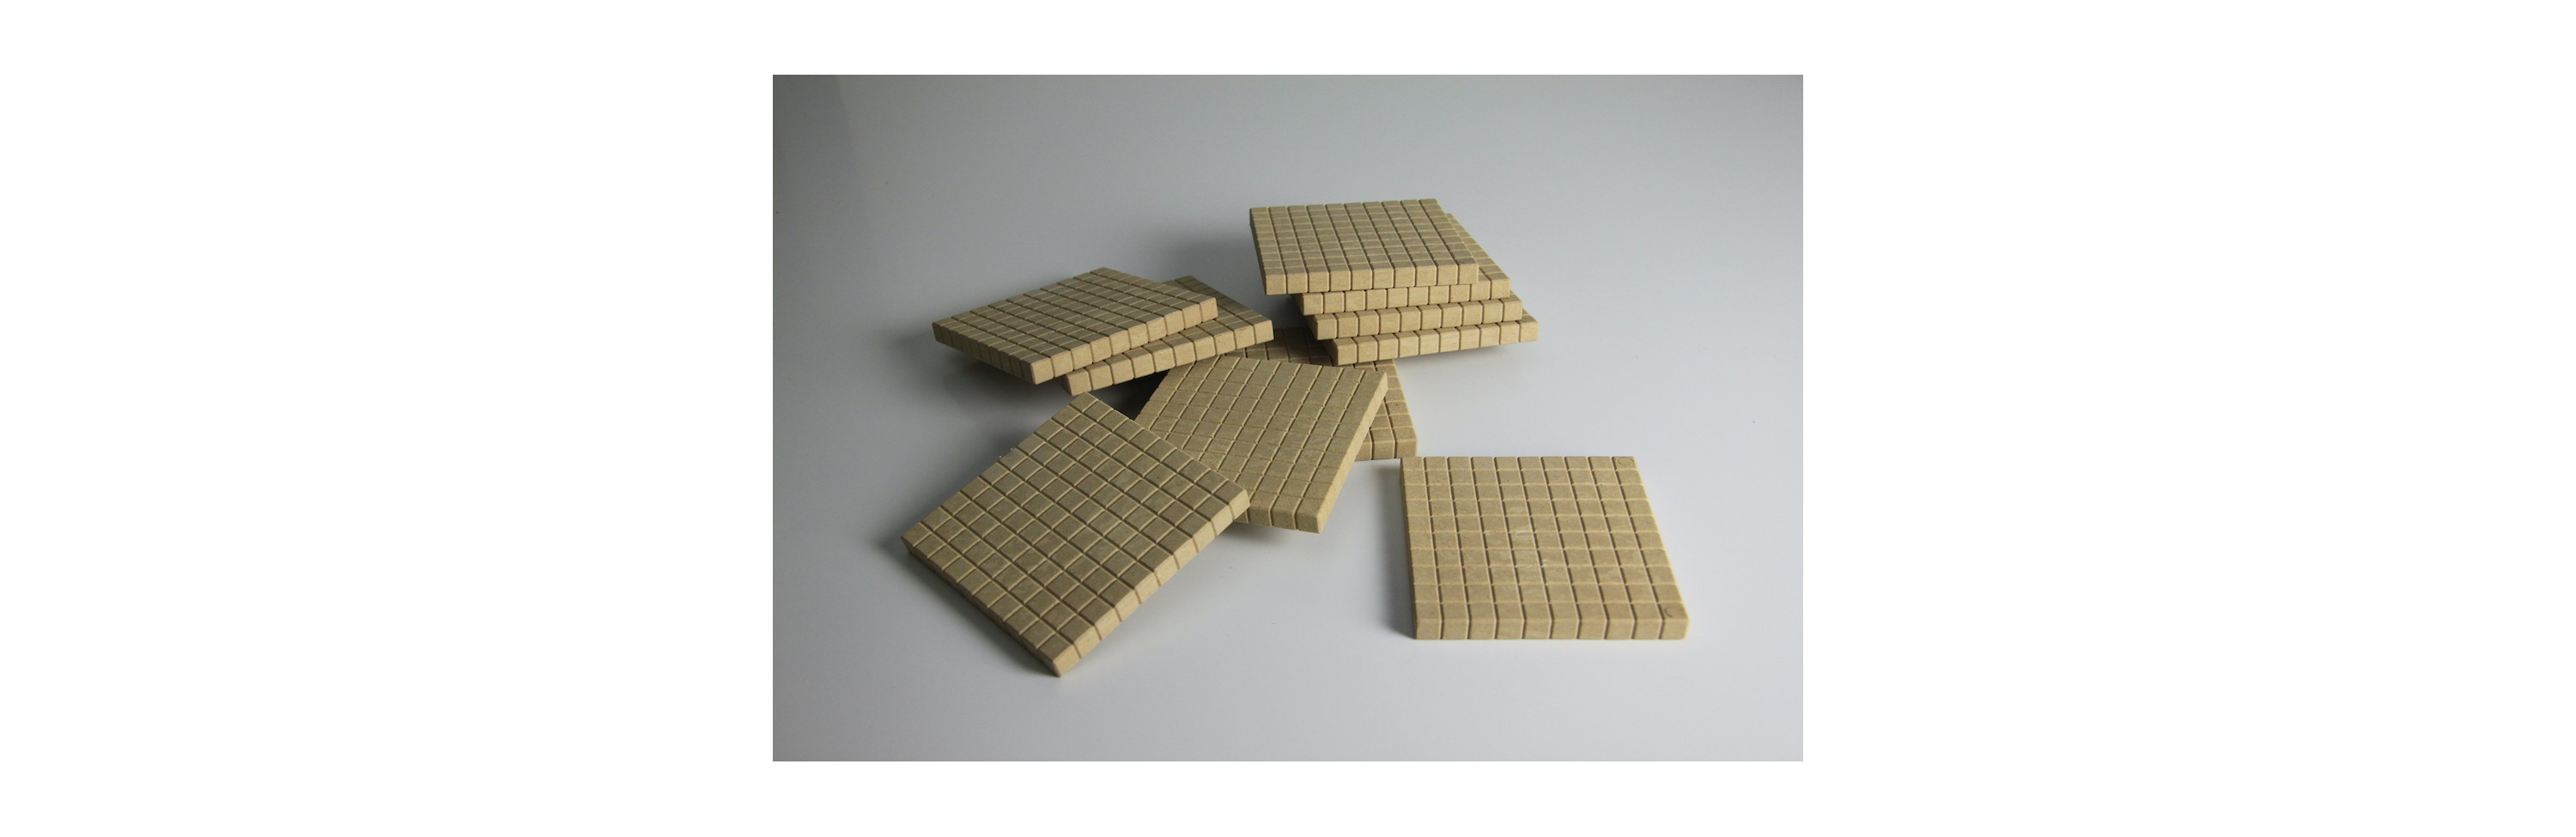 Wissner® active learning - Dienes Base Ten Hundred flats in natural colours (10 pcs) RE-Wood®